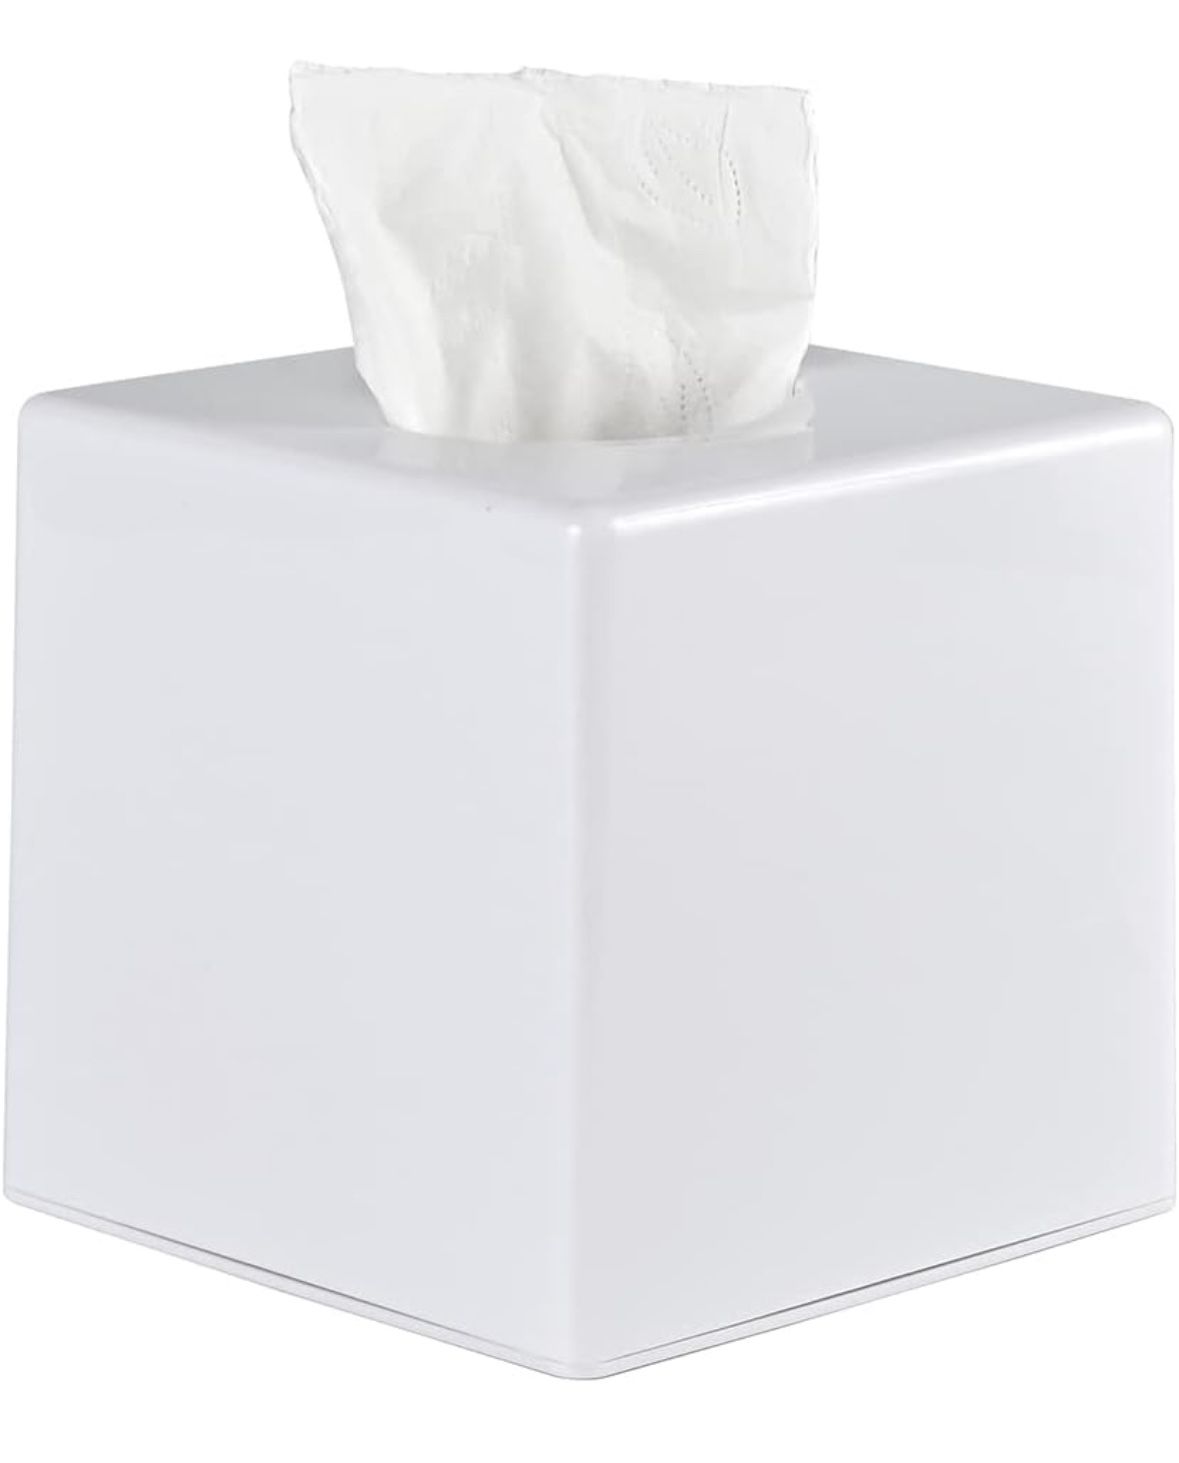 Y-in-hand Tissue Cover Box 